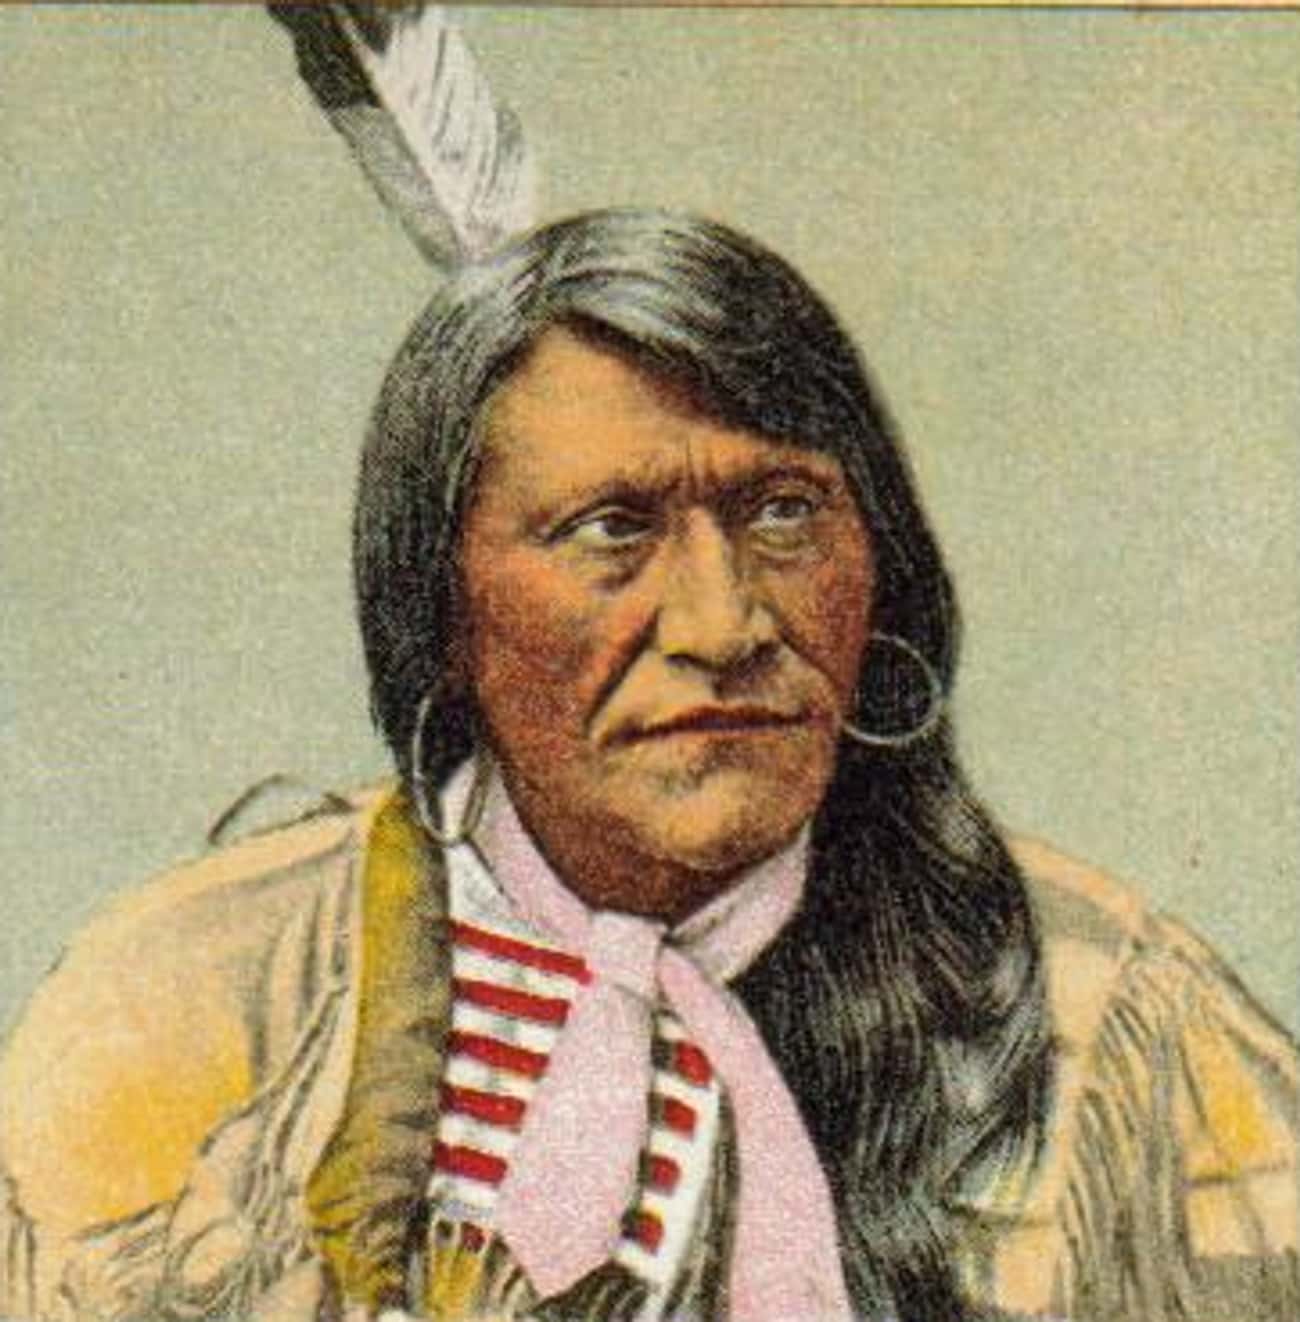 The American Government Apologized To Native Americans By Giving The Worst Imaginable Peace Offerings